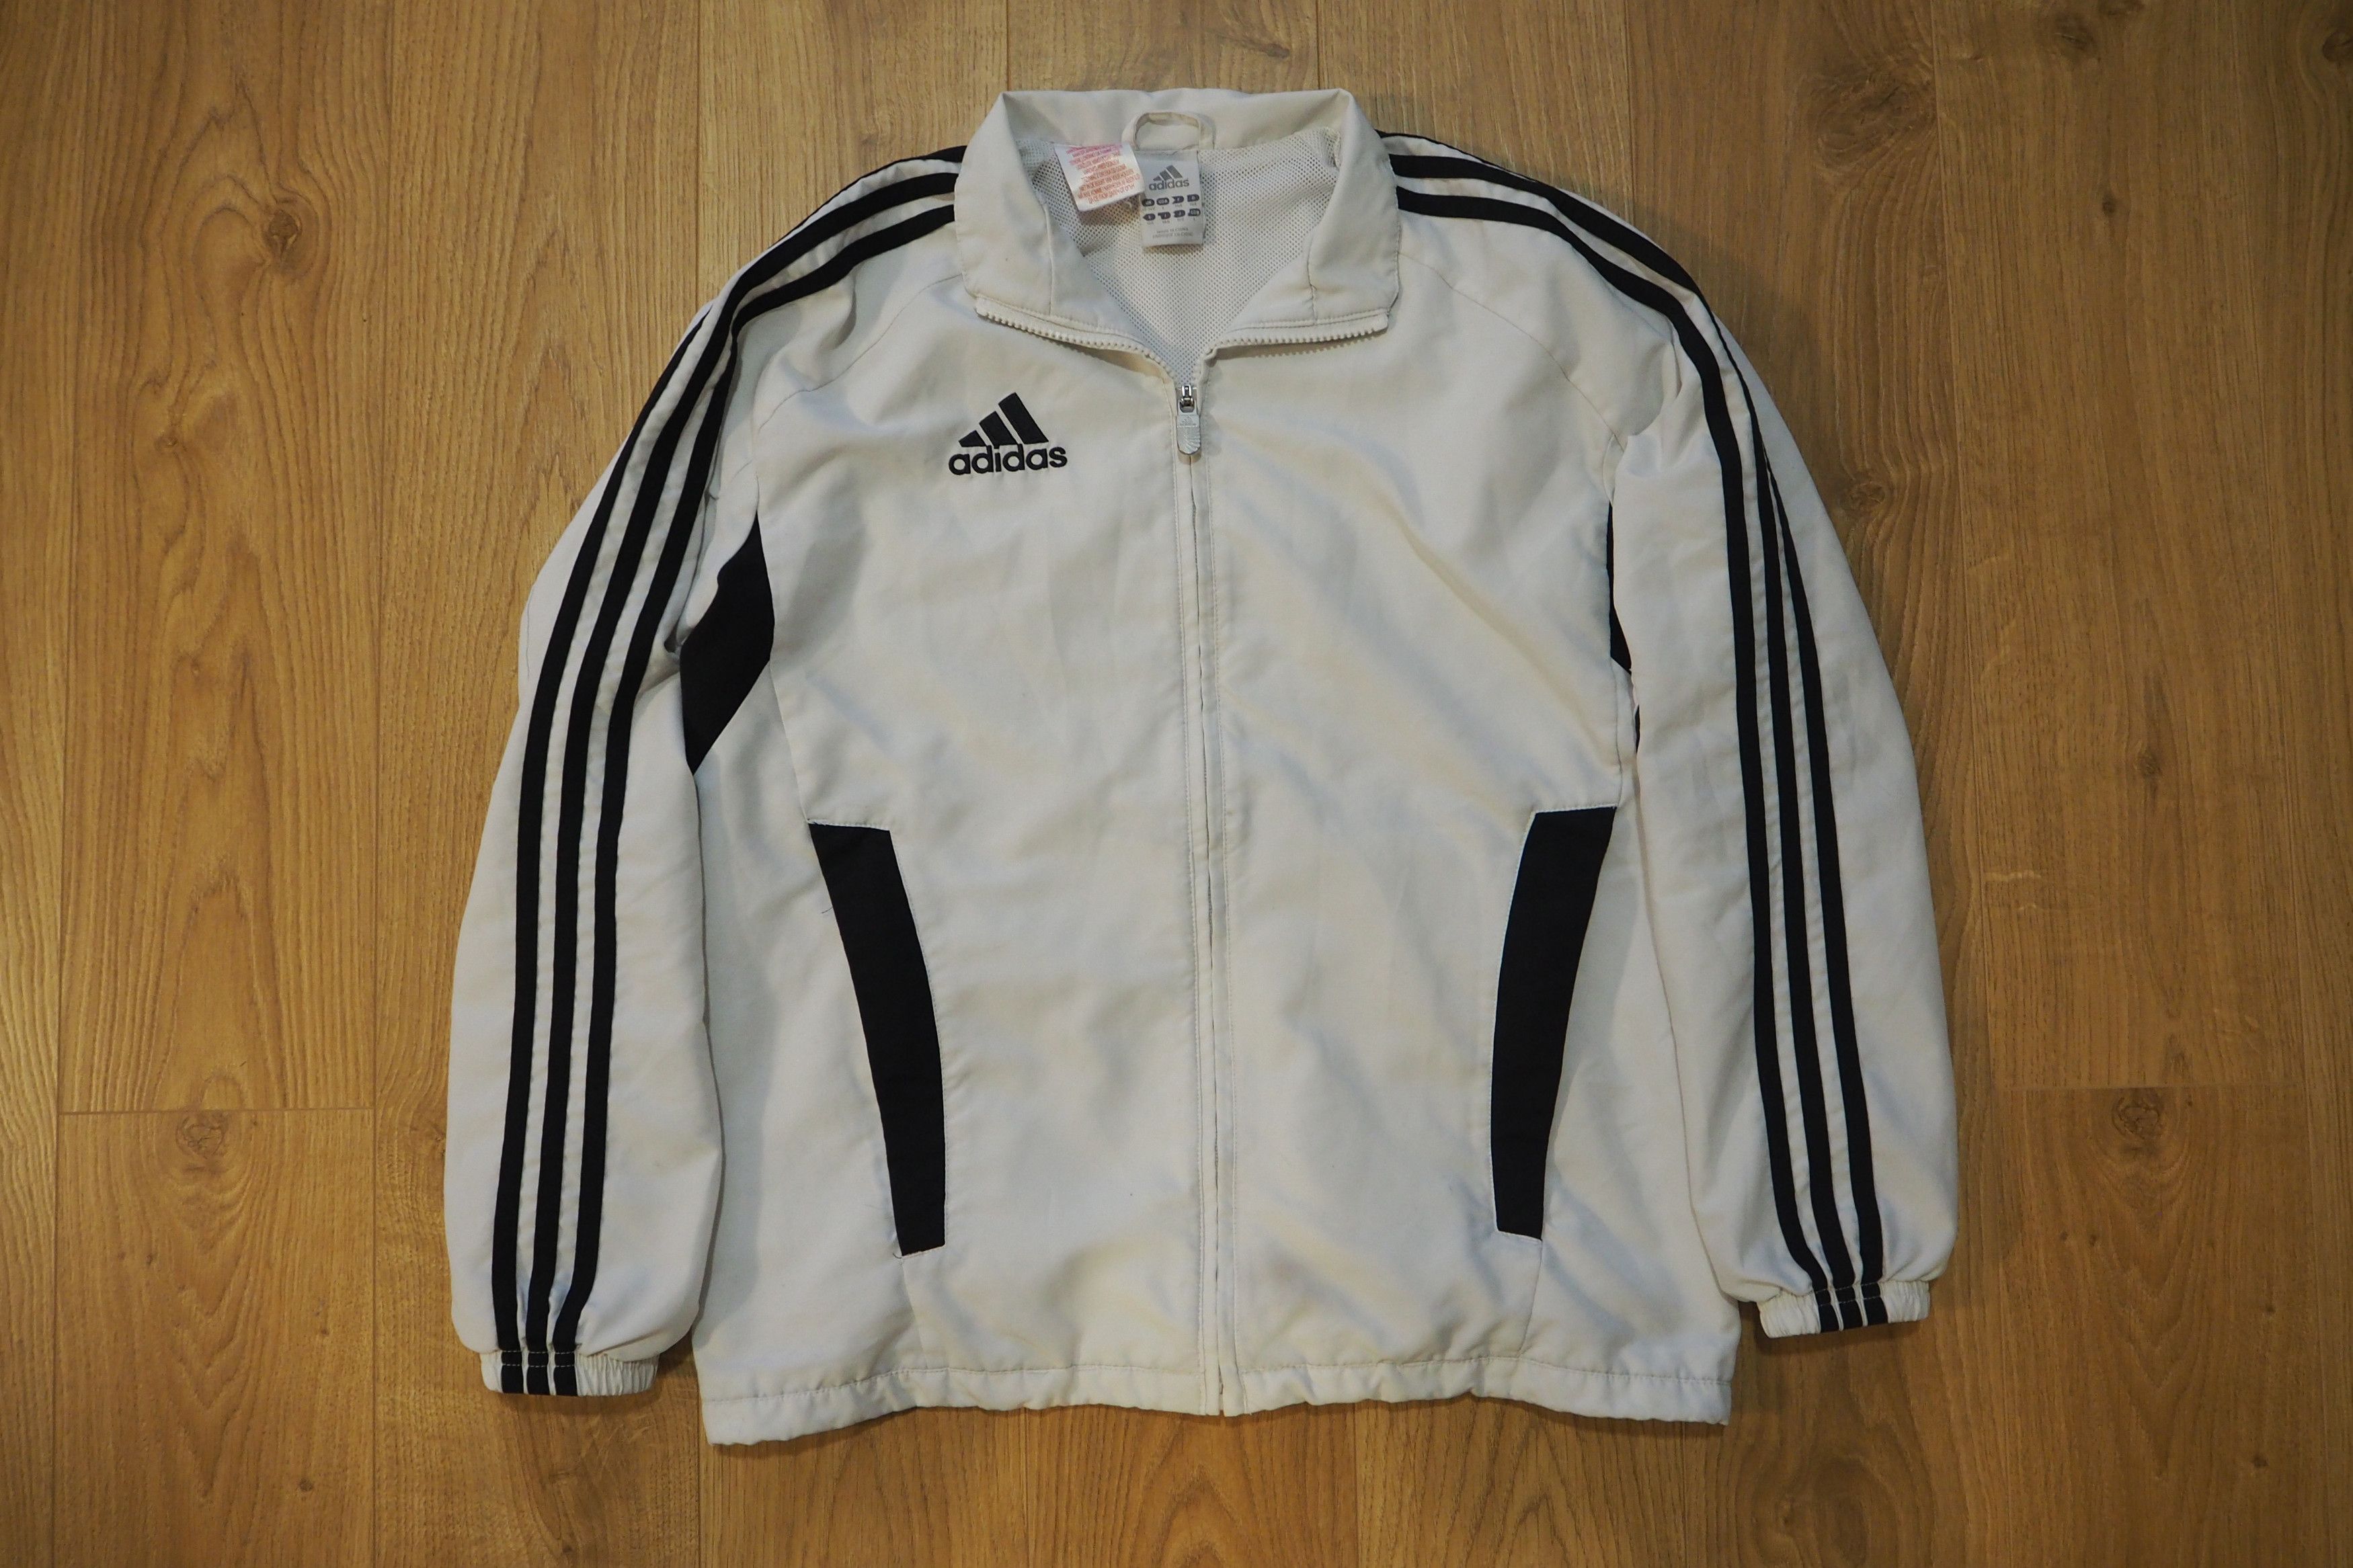 Adidas RUSSIAN style adidas jacket Size US S / EU 44-46 / 1 - 1 Preview